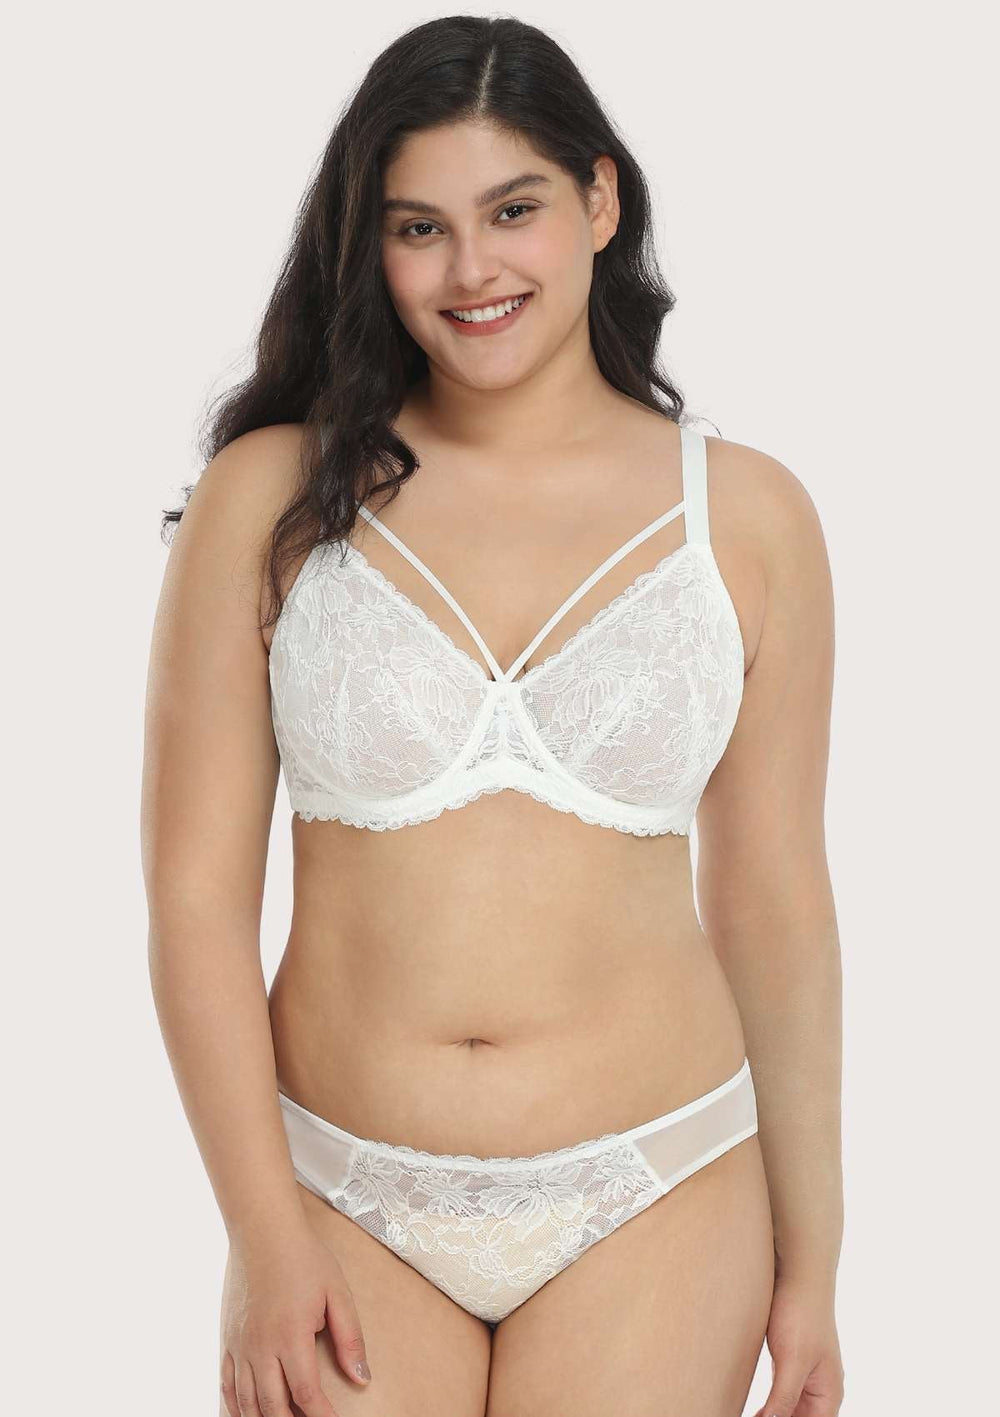 Plus Size Bra and Panty Sets for Women Underwire White Ultra Thin Sexy See  Through Bras Lingerie Set (Color : White, Size : 95/42C)